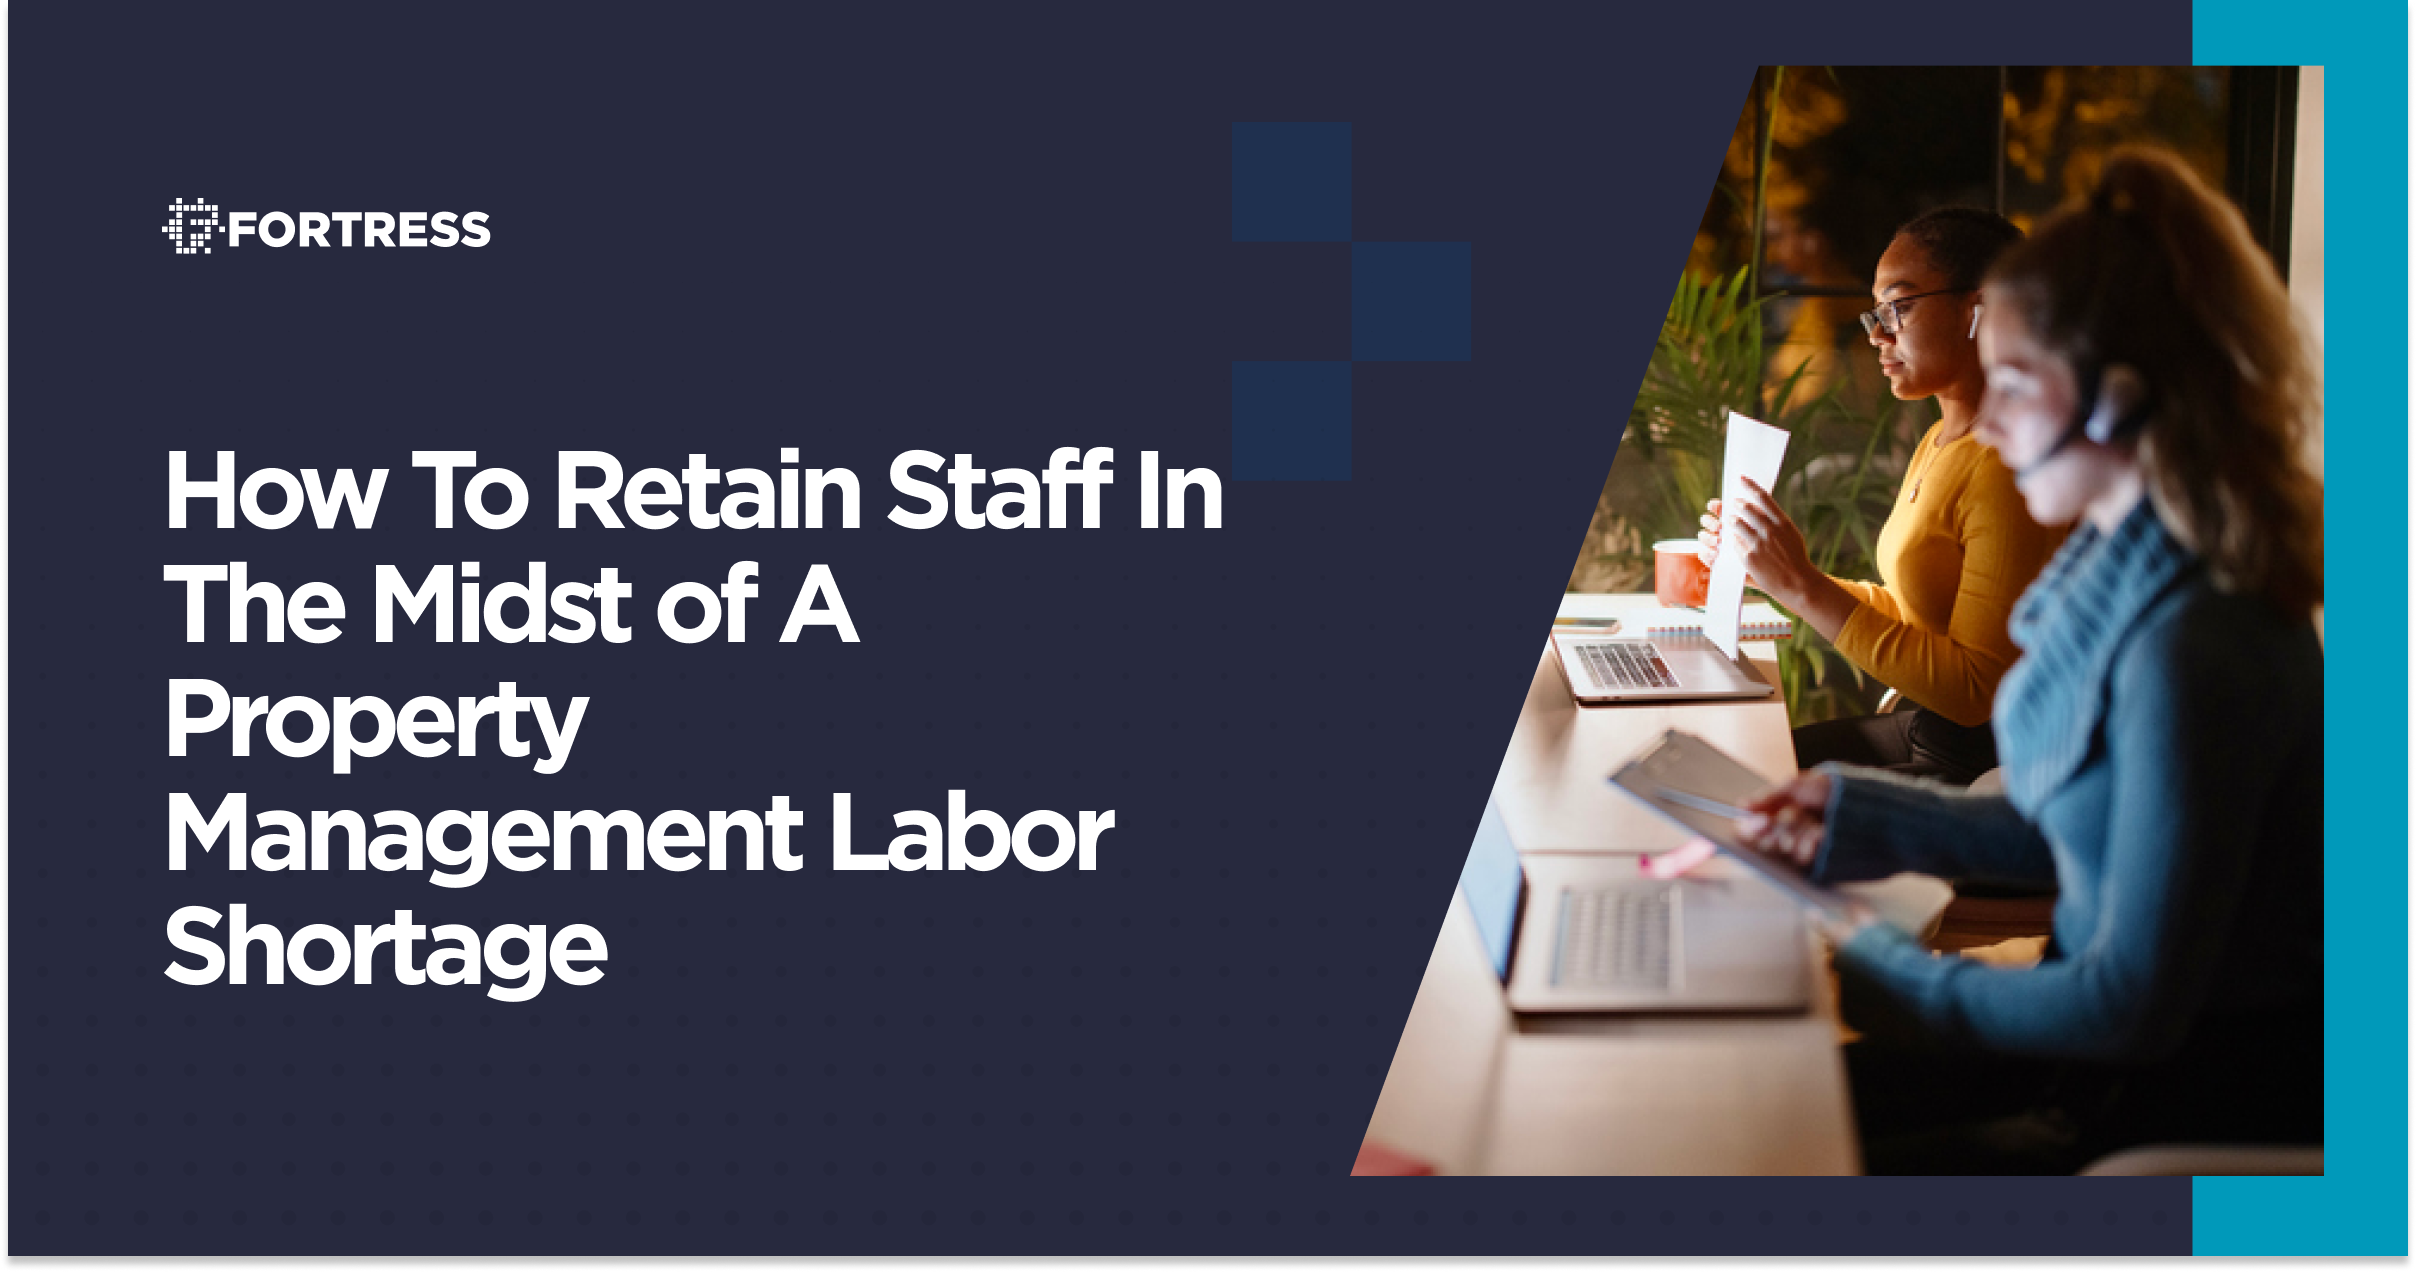 How To Retain Staff In The Midst of A Property Management Labor Shortage